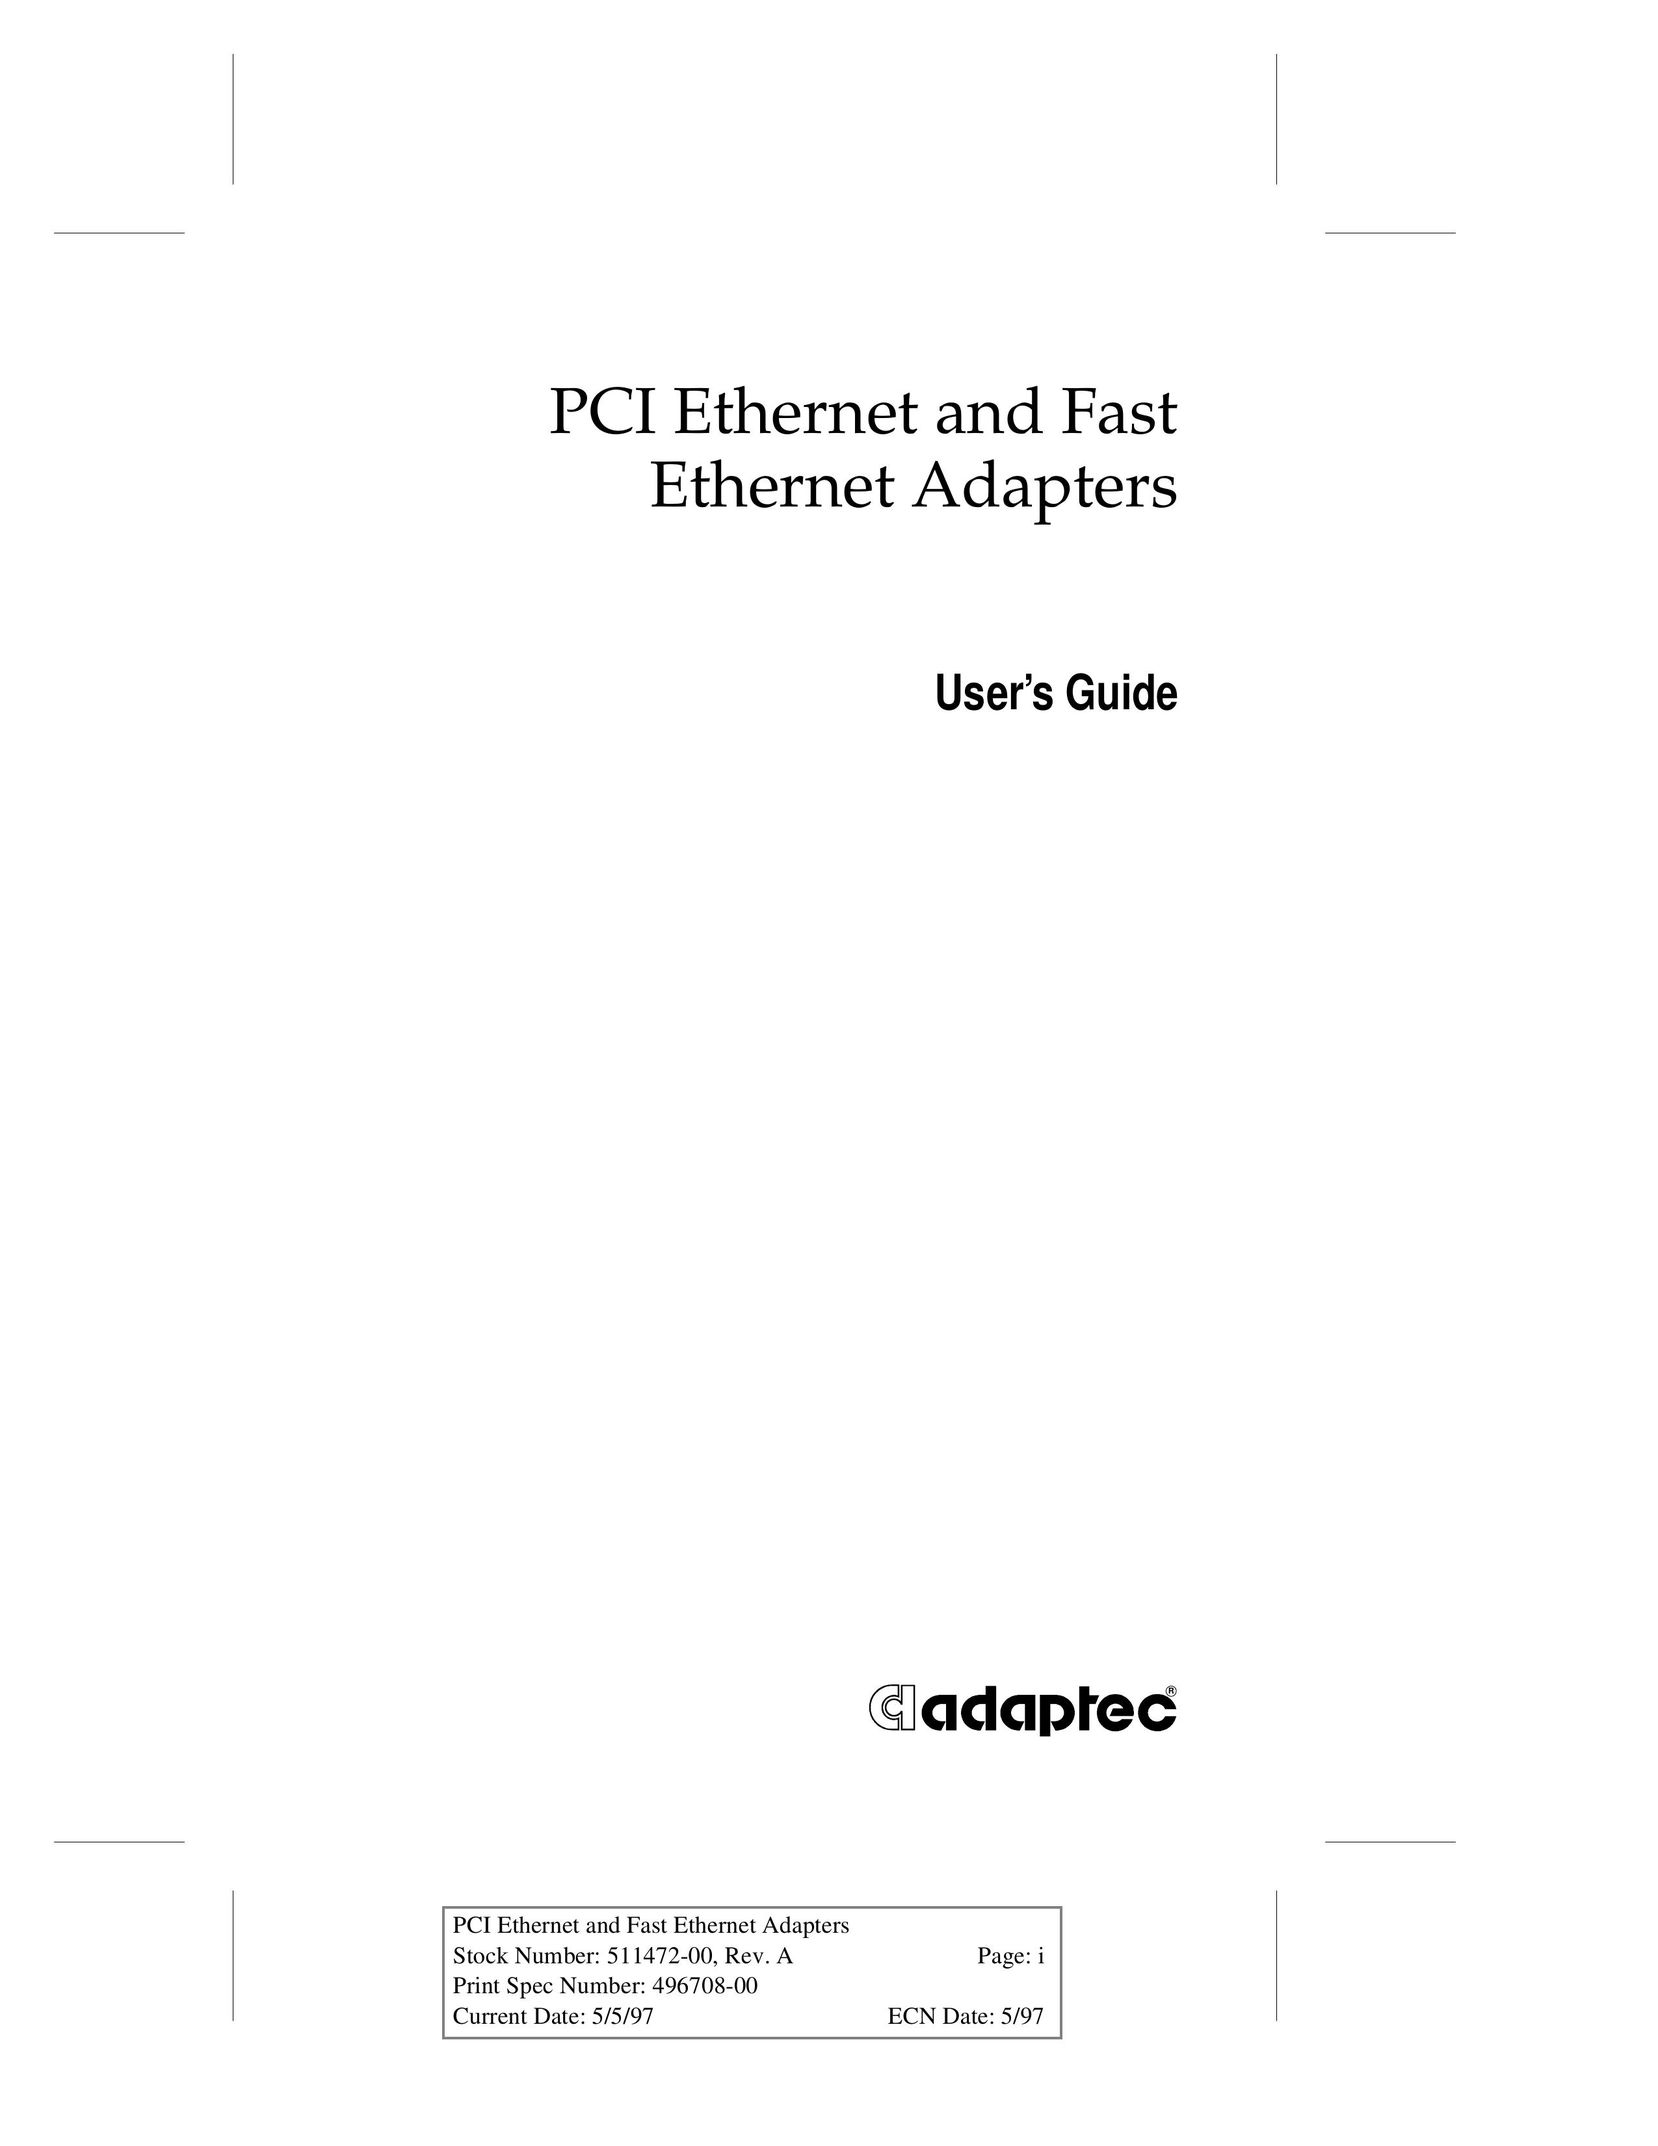 Adaptec PCI Ethernet and Fast Ethernet Adapters Network Card User Manual